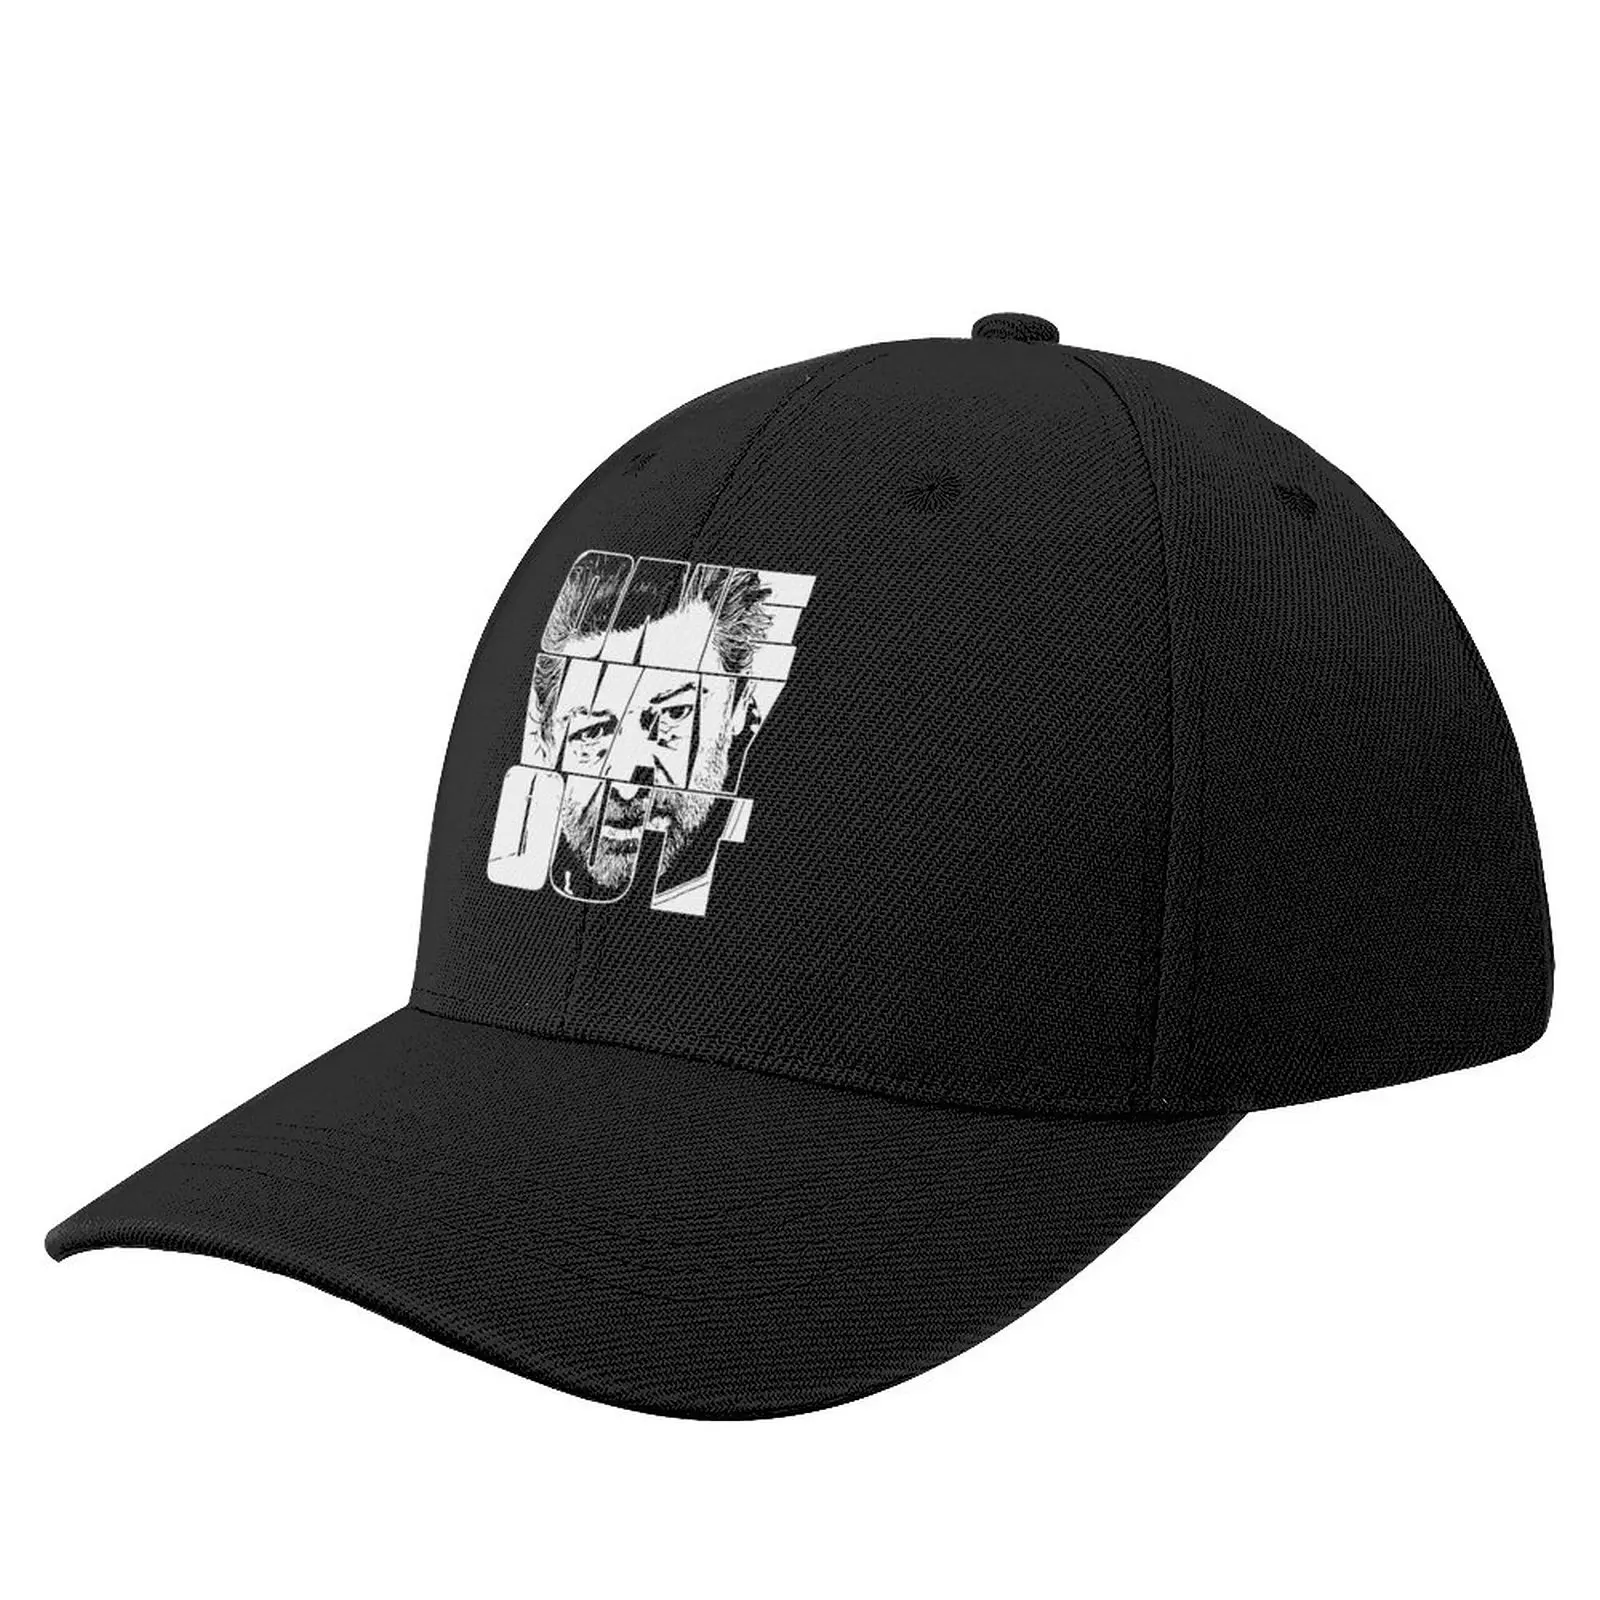 

One Way Out - Kino Loy Andy Serkis TV show Quote - White Outline version Baseball Cap cute Horse Hat Hat Female Men's